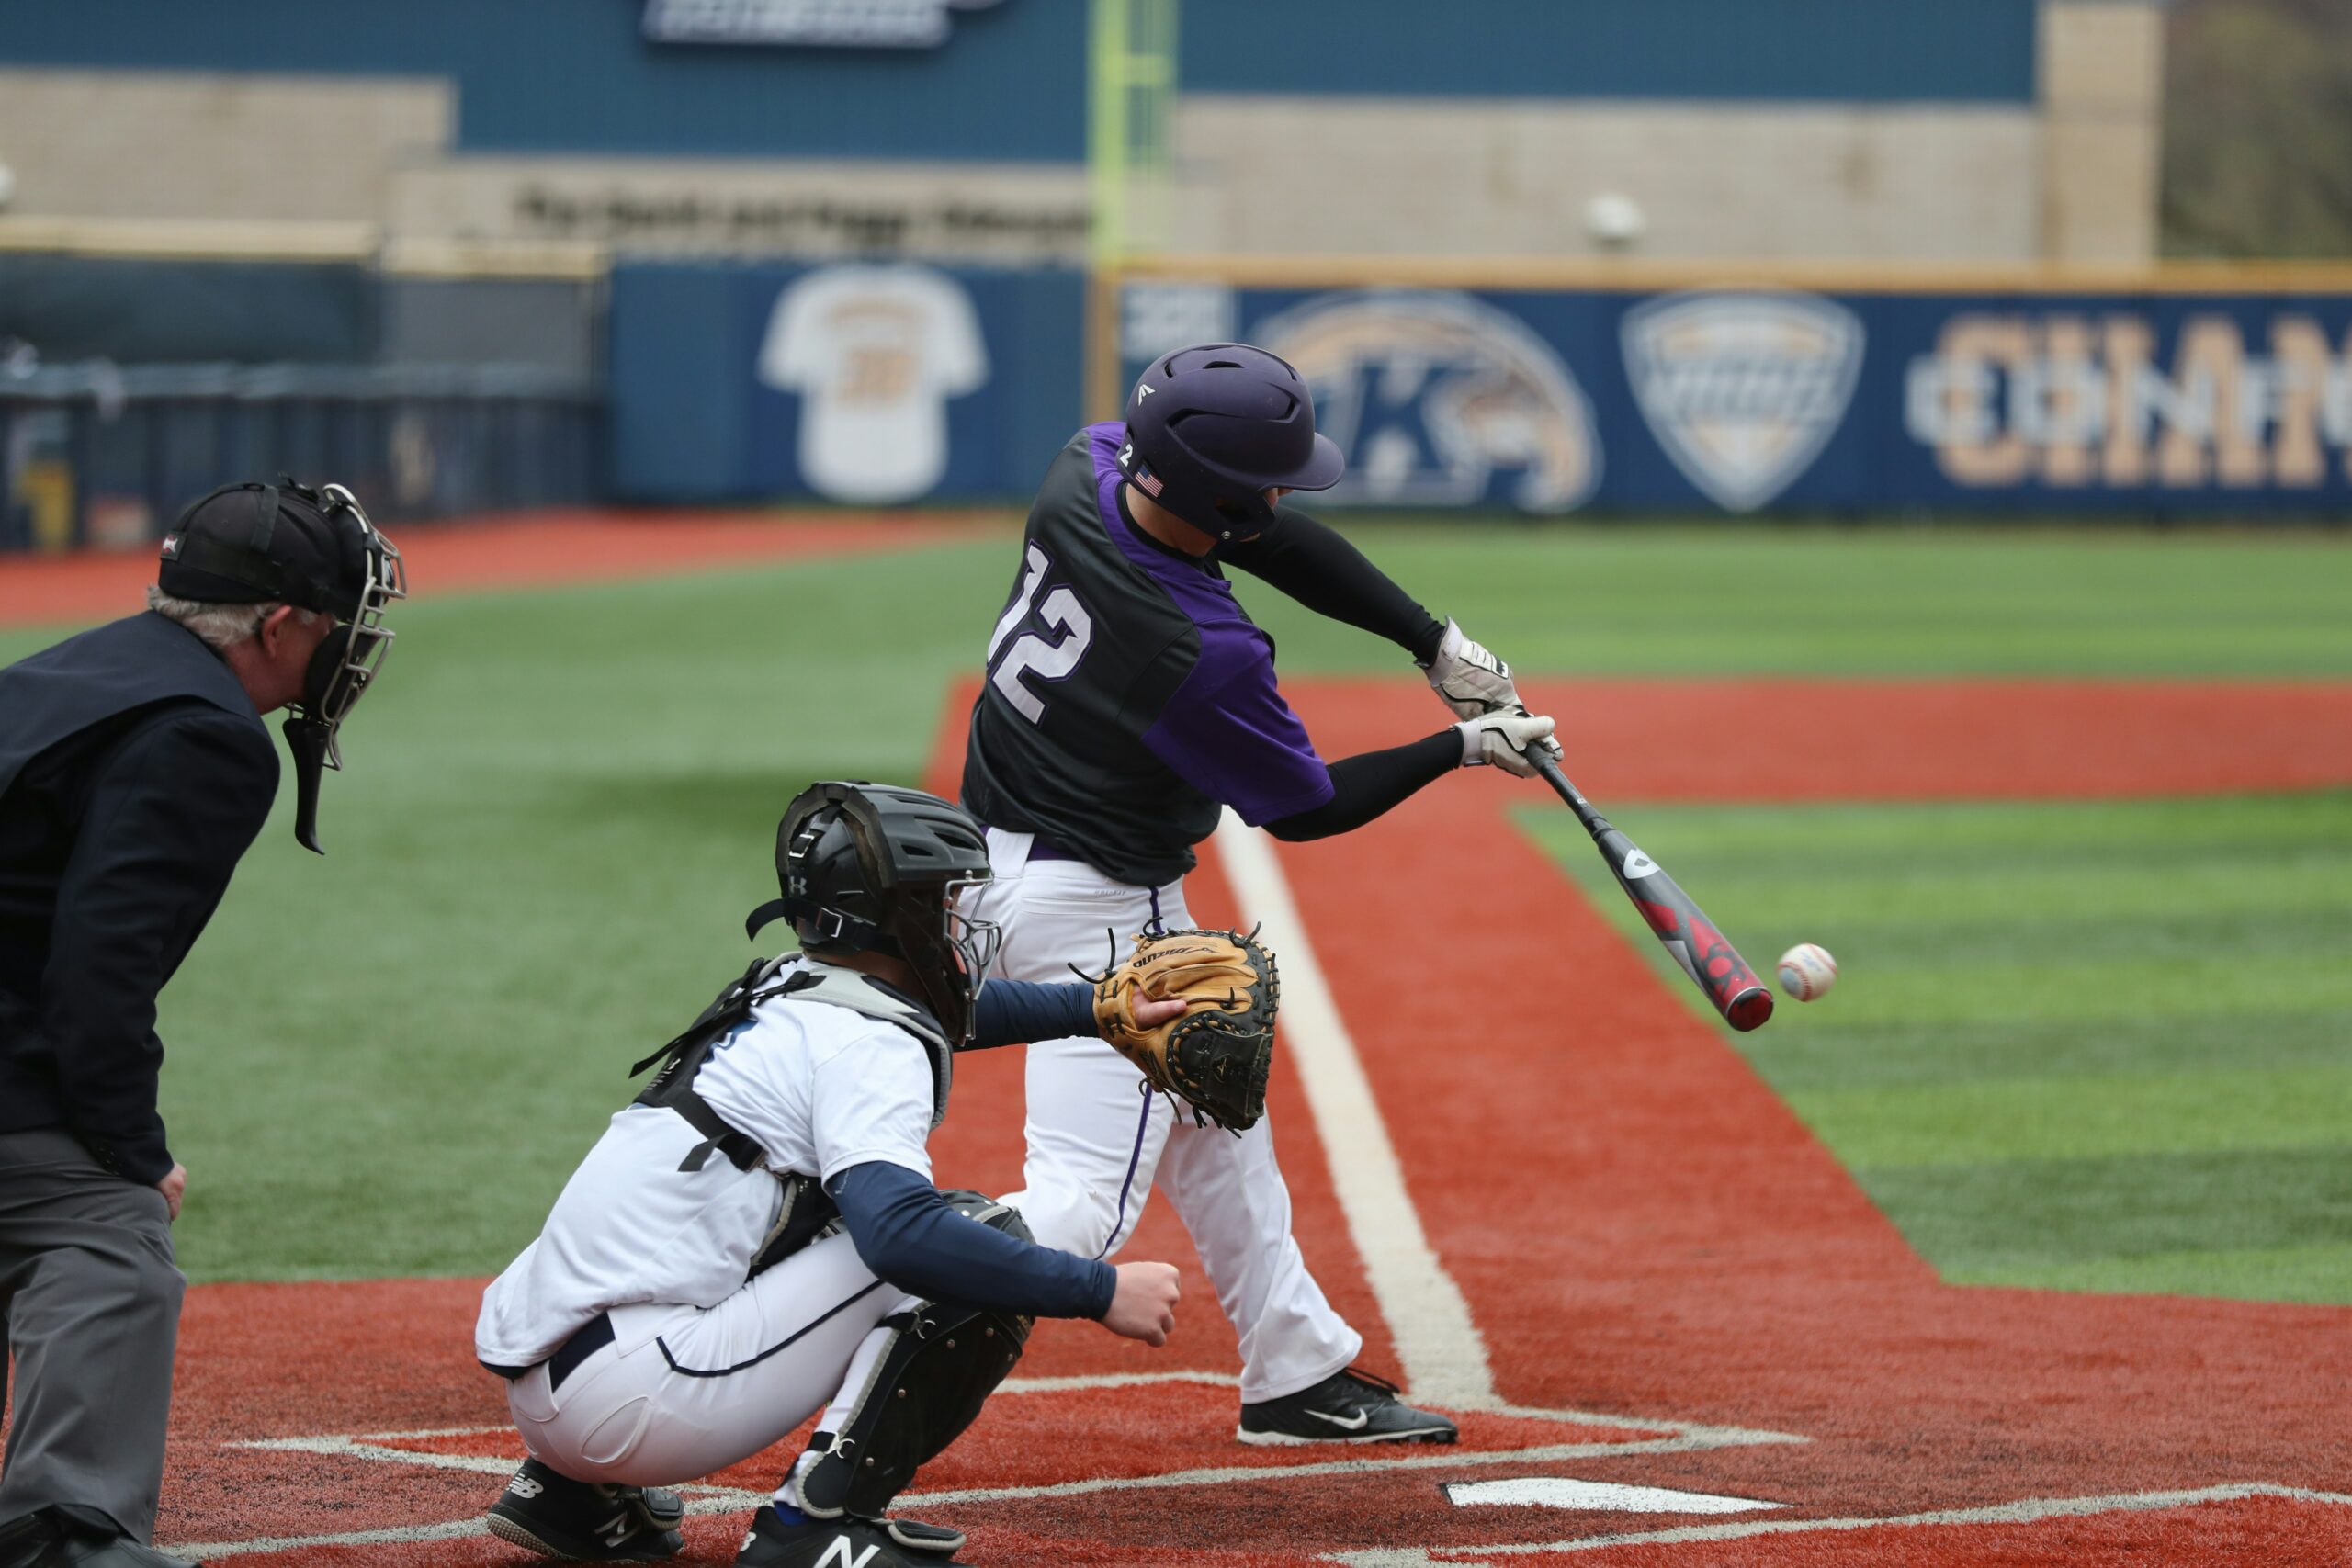 photo of a baseball player at the plate, swinging their bat.